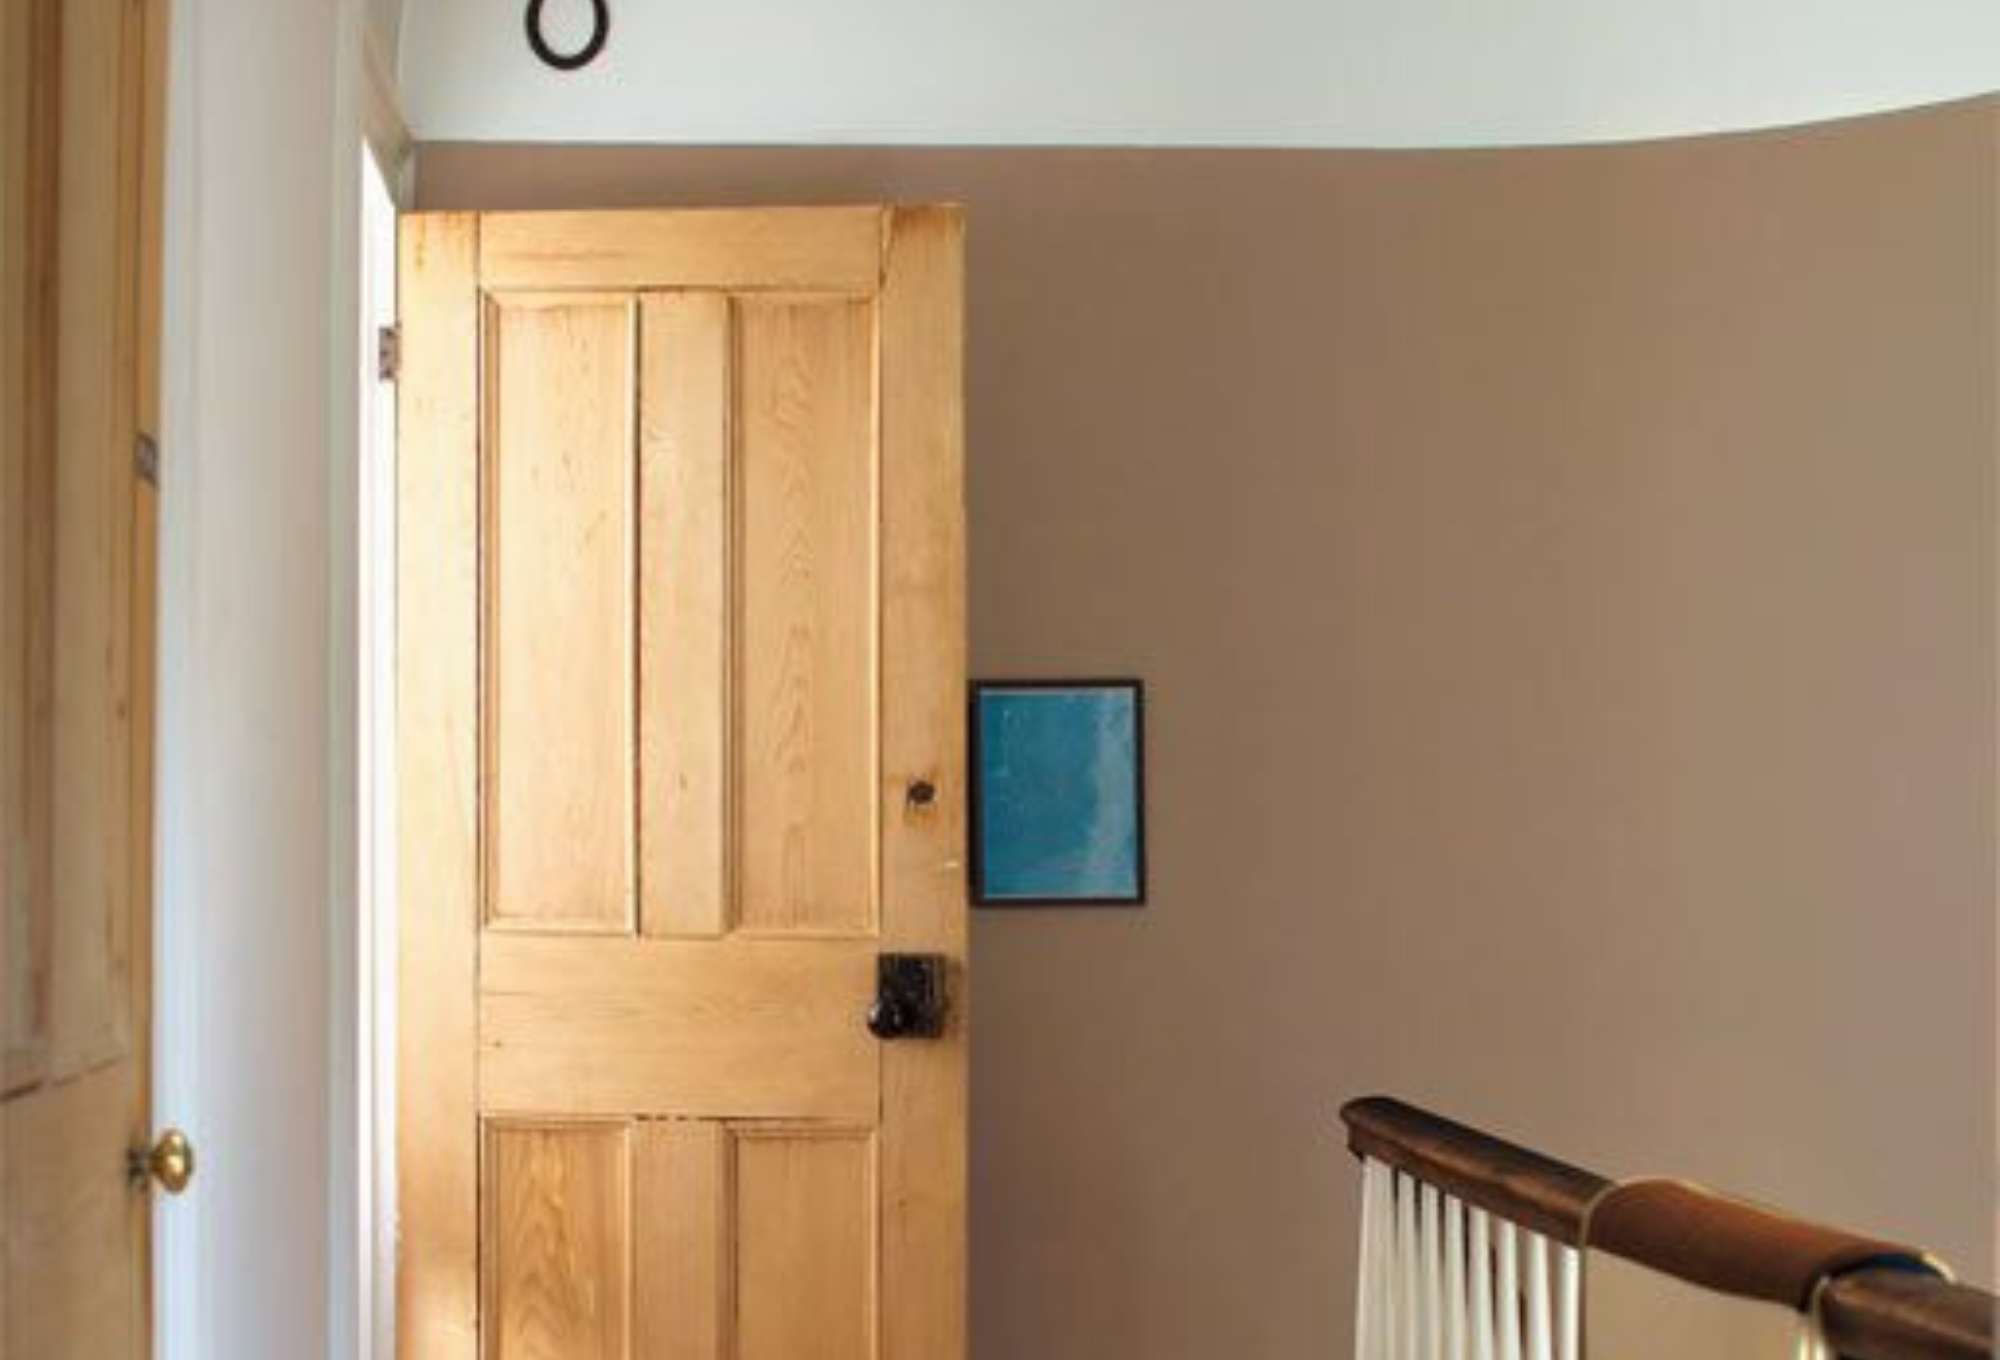 Benjamin Moore Midcentury Color available at JC Licht